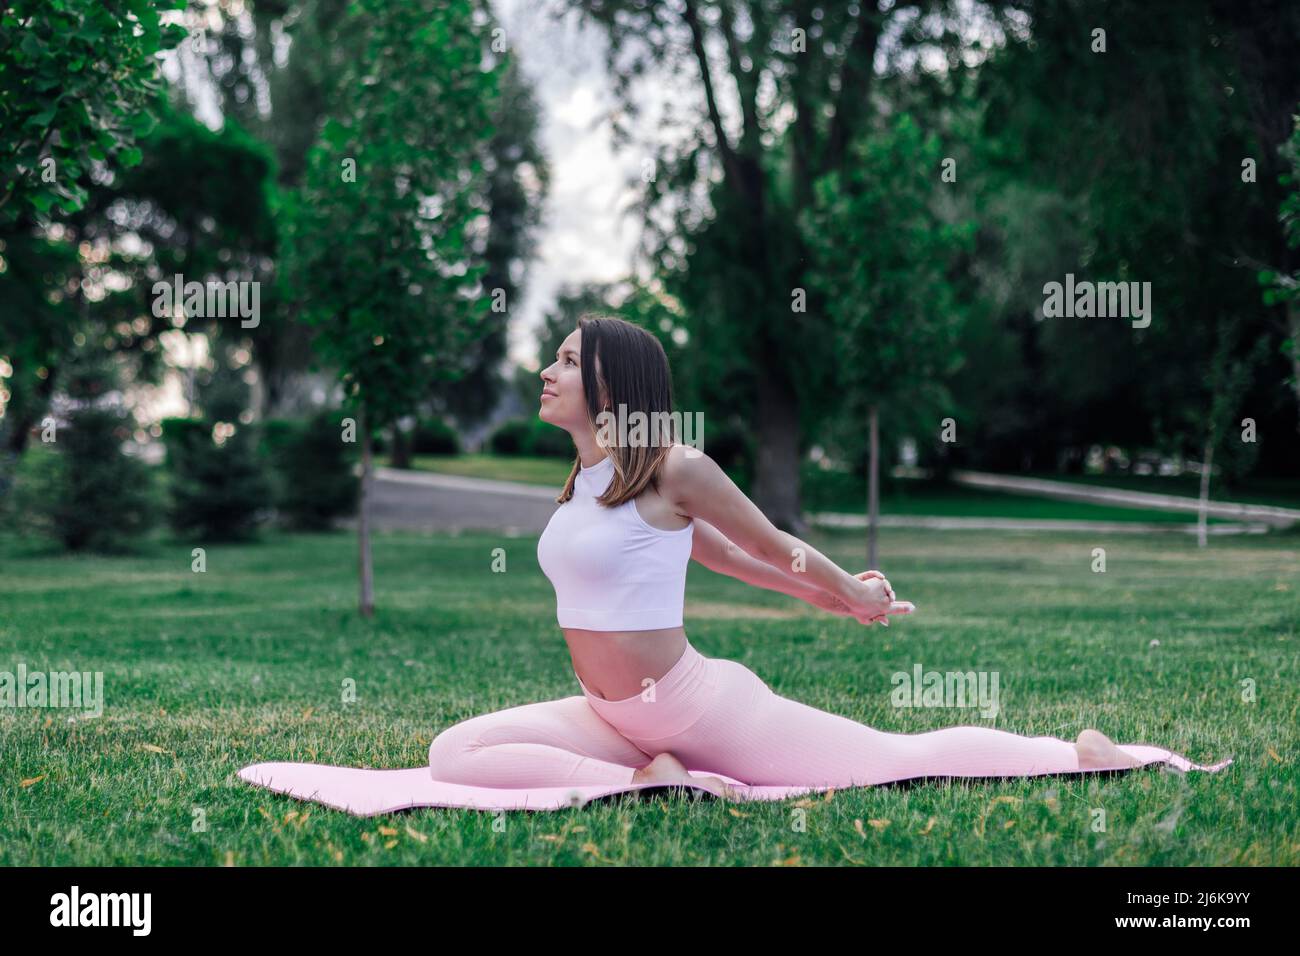 Young athletic woman practice yoga on gymnastic mat in green park on grass. Do stretching exercises for good posture in sportswear, free copy space Stock Photo